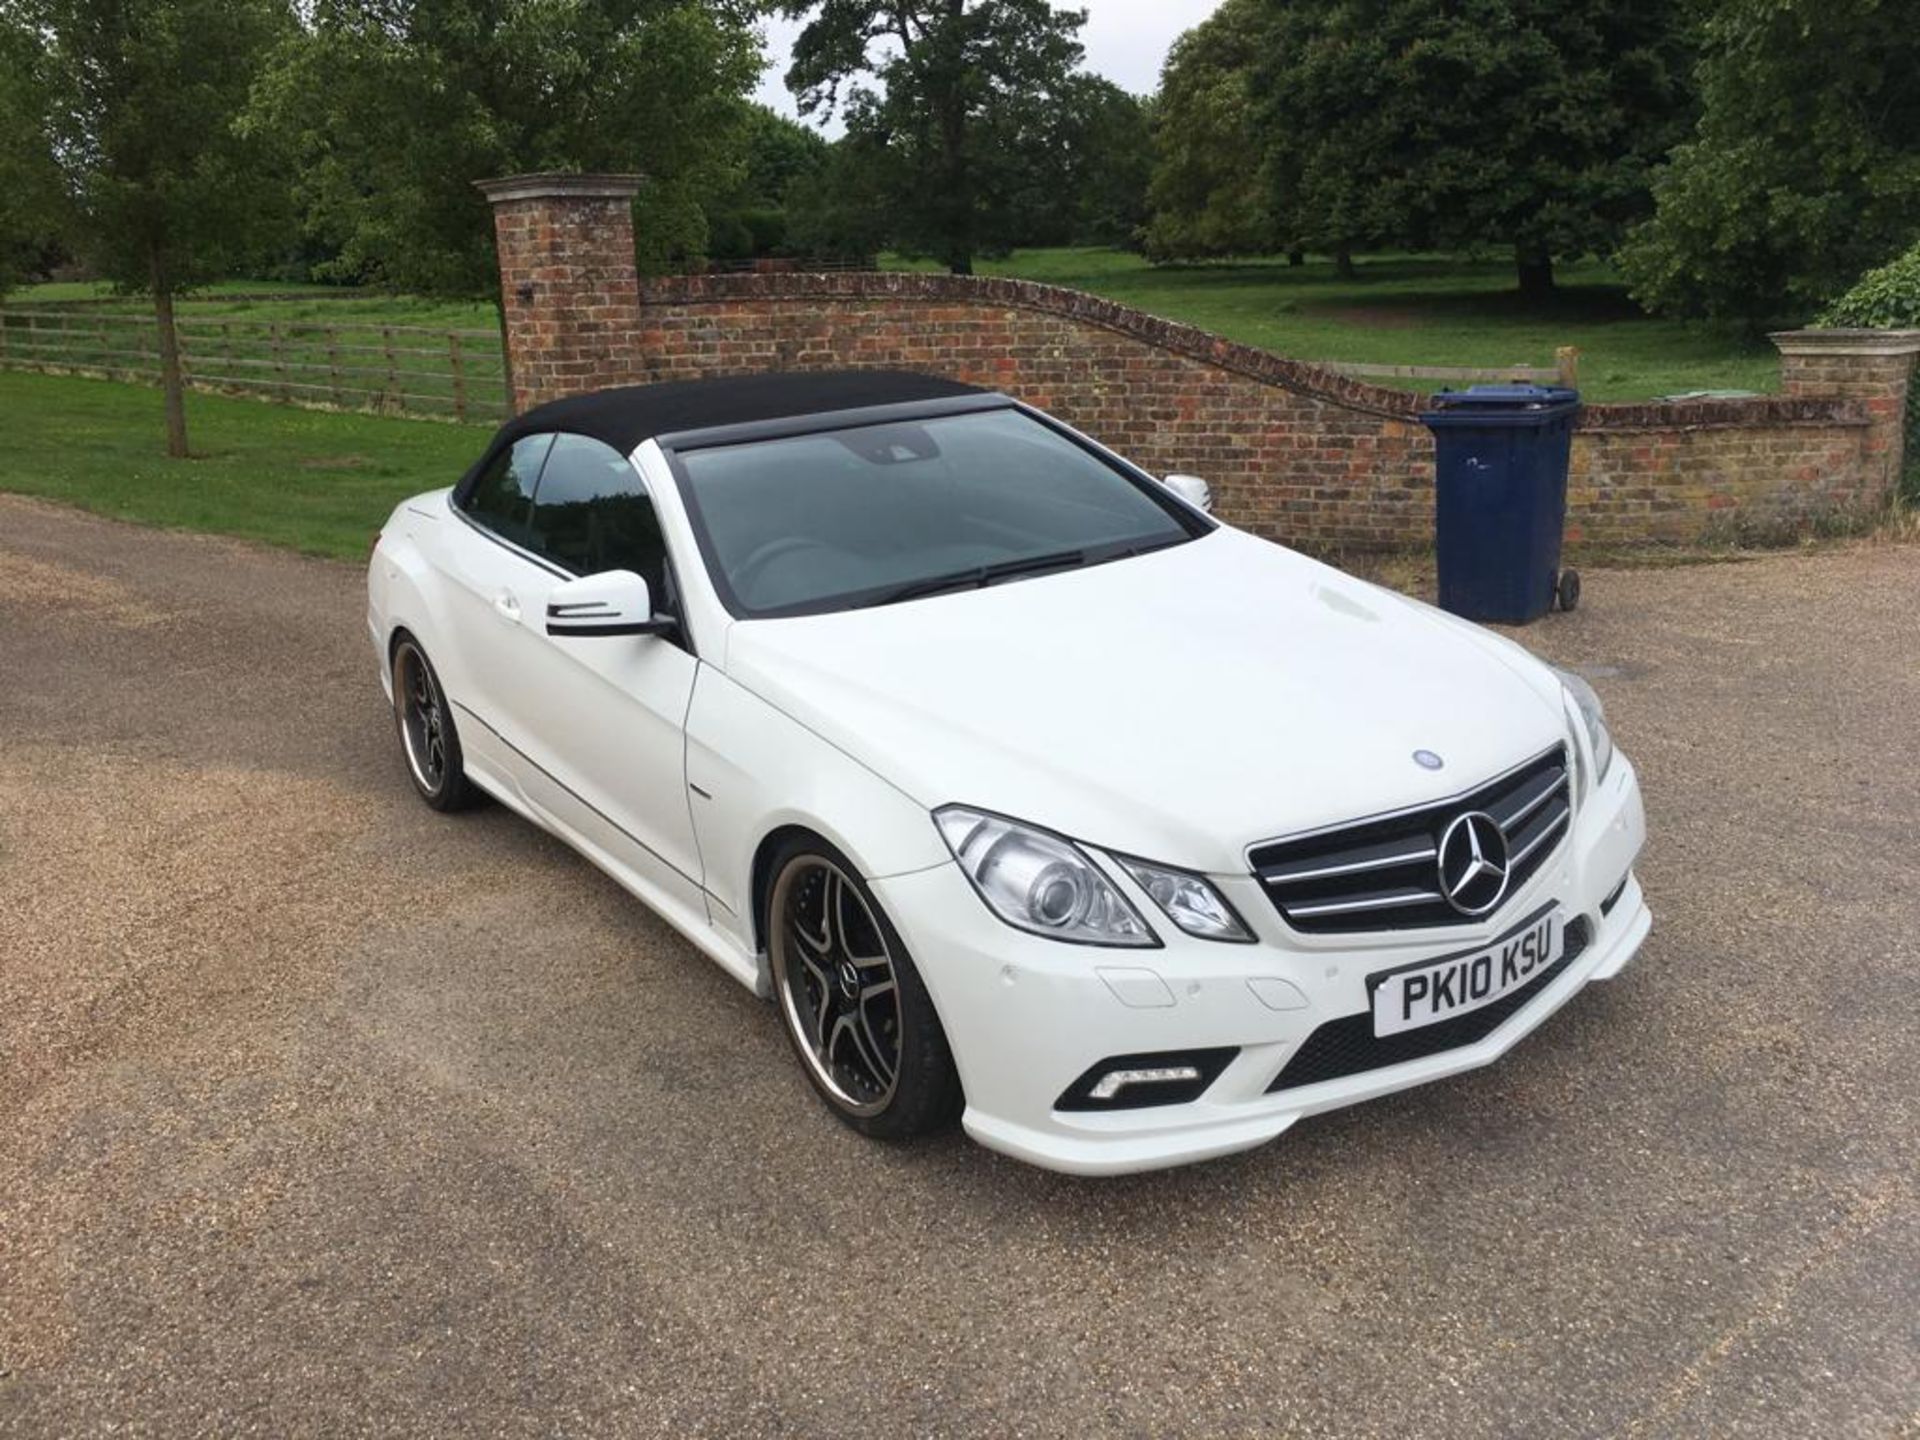 2010 MERCEDES BENZ E350 CONVERTIBLE SPORT CGI BLUEFFICENCY AUTO **ONE FORMER KEEPER FROM NEW** - Image 2 of 24